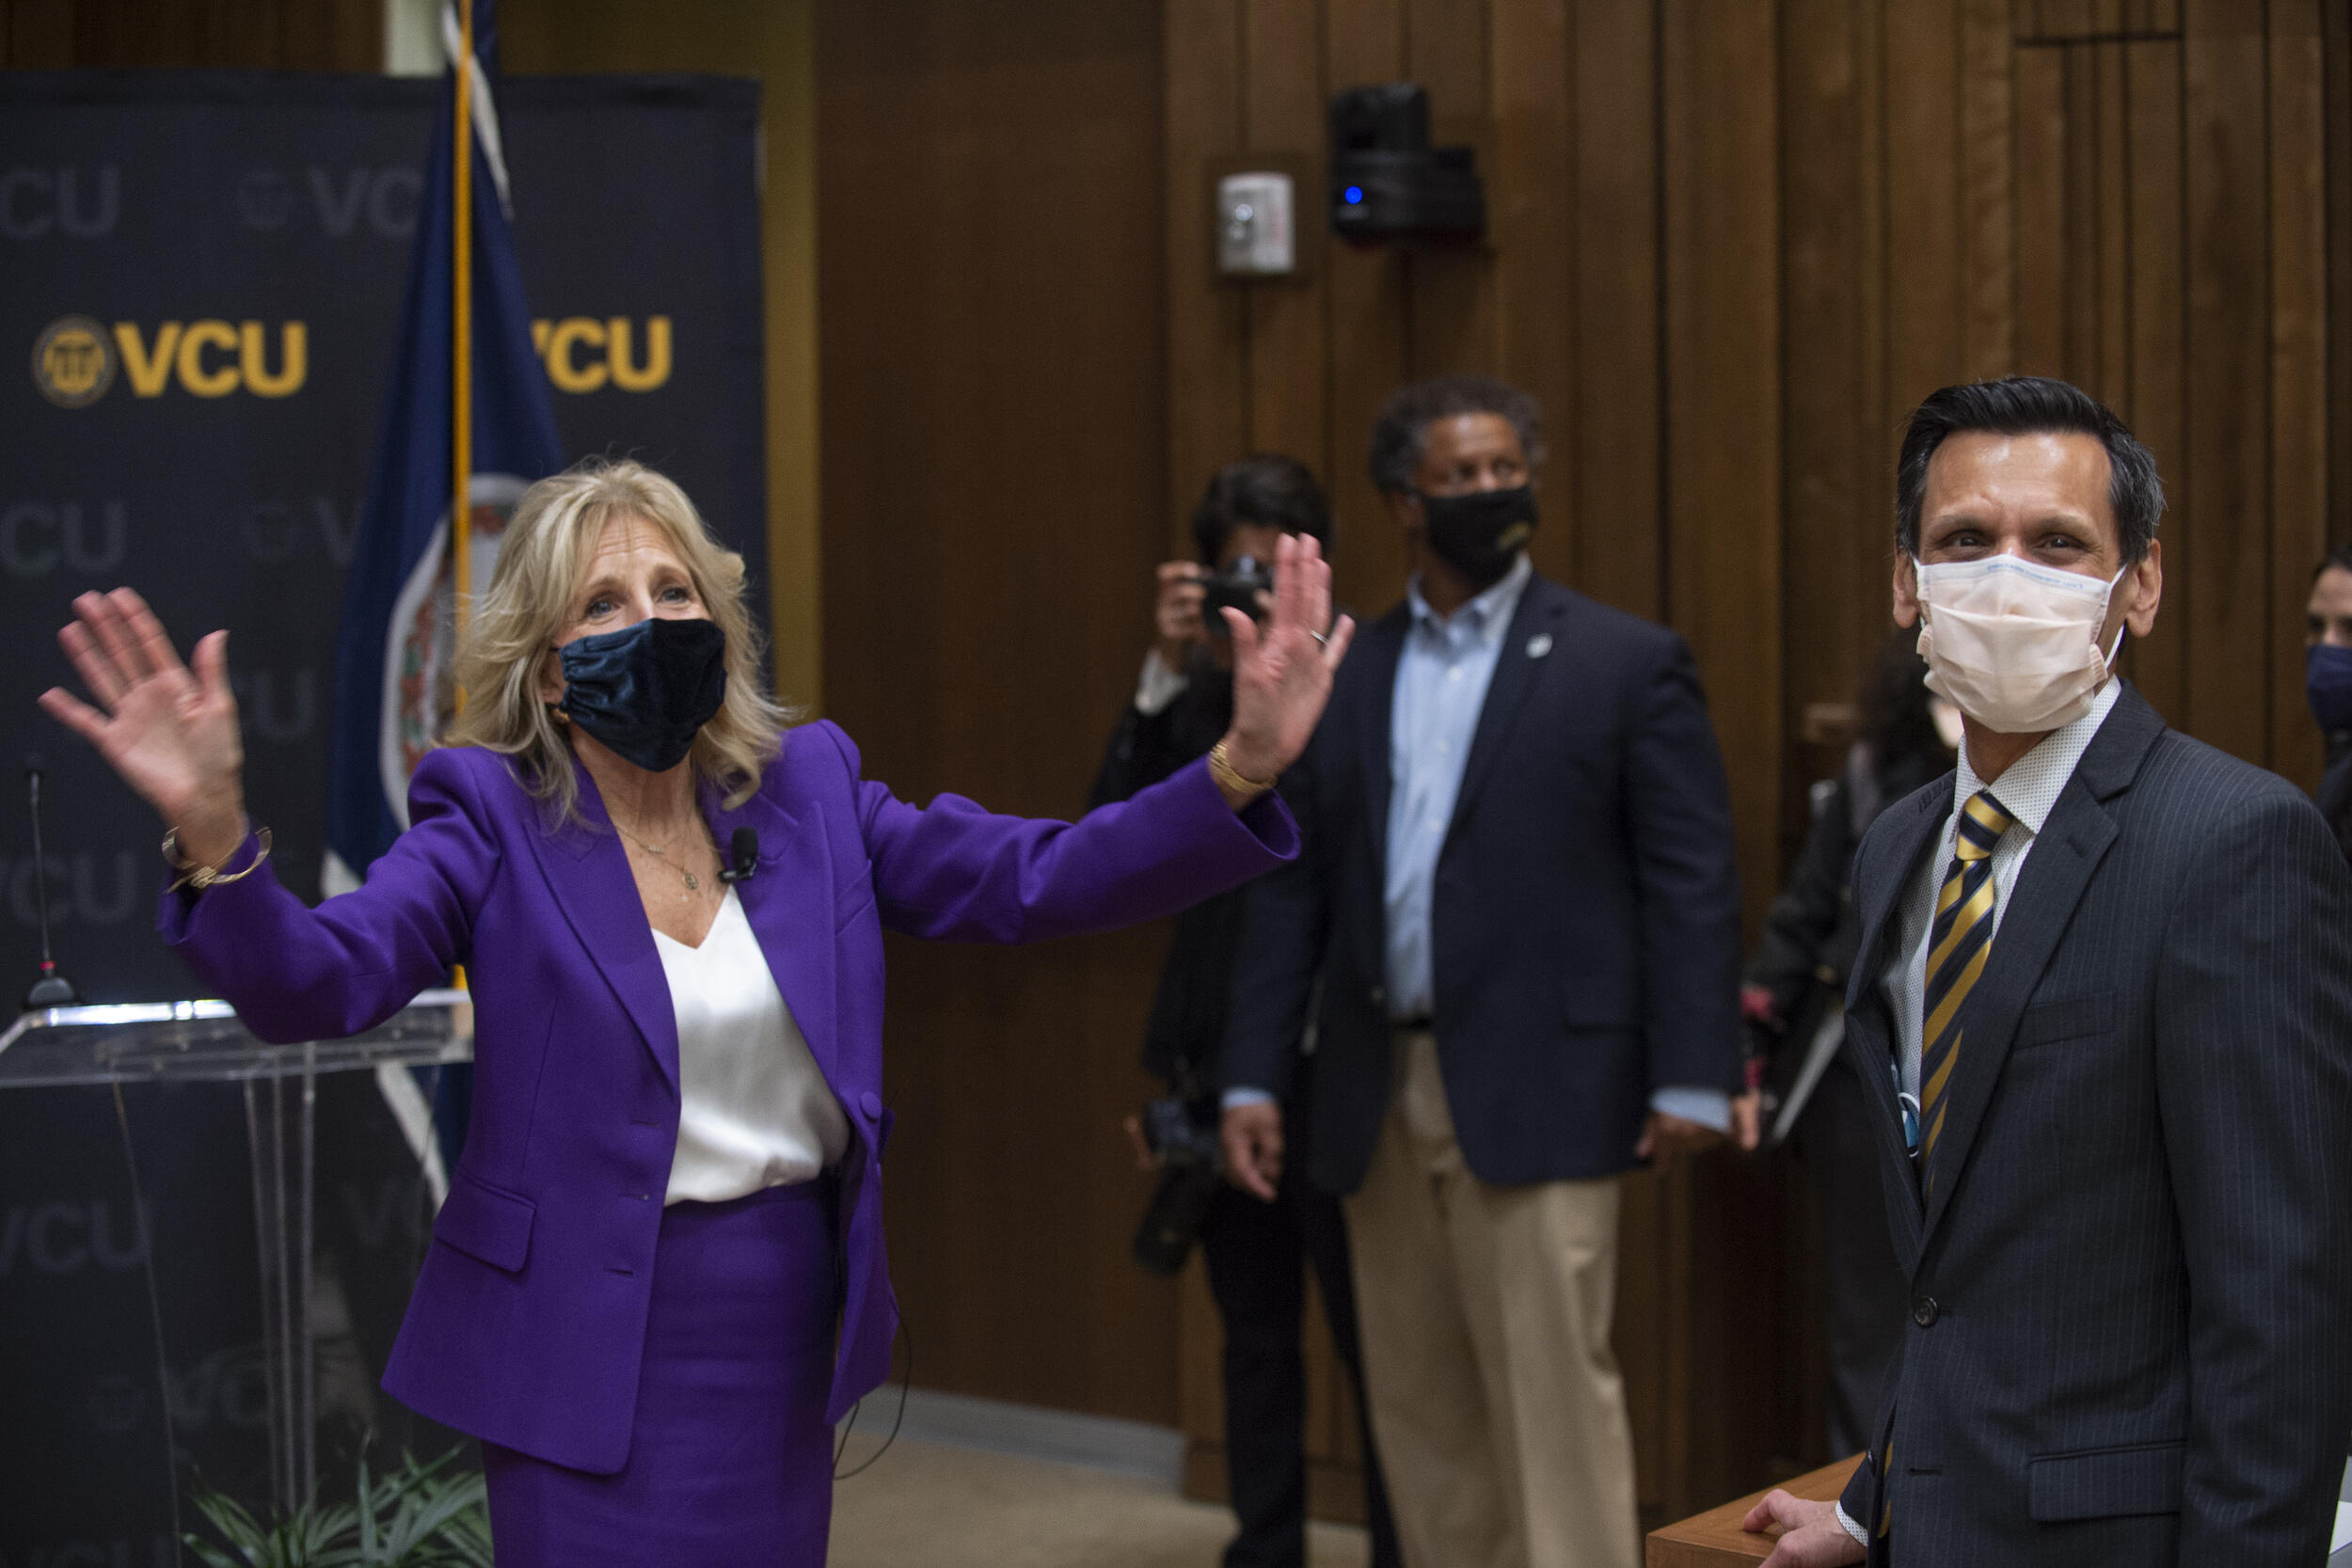 First lady Jill Biden, Ed.D., bids farewell to the audience. At right is VCU President Michael Rao, Ph.D. In the background (center) is Robert Winn, M.D., director of Massey Cancer Center.